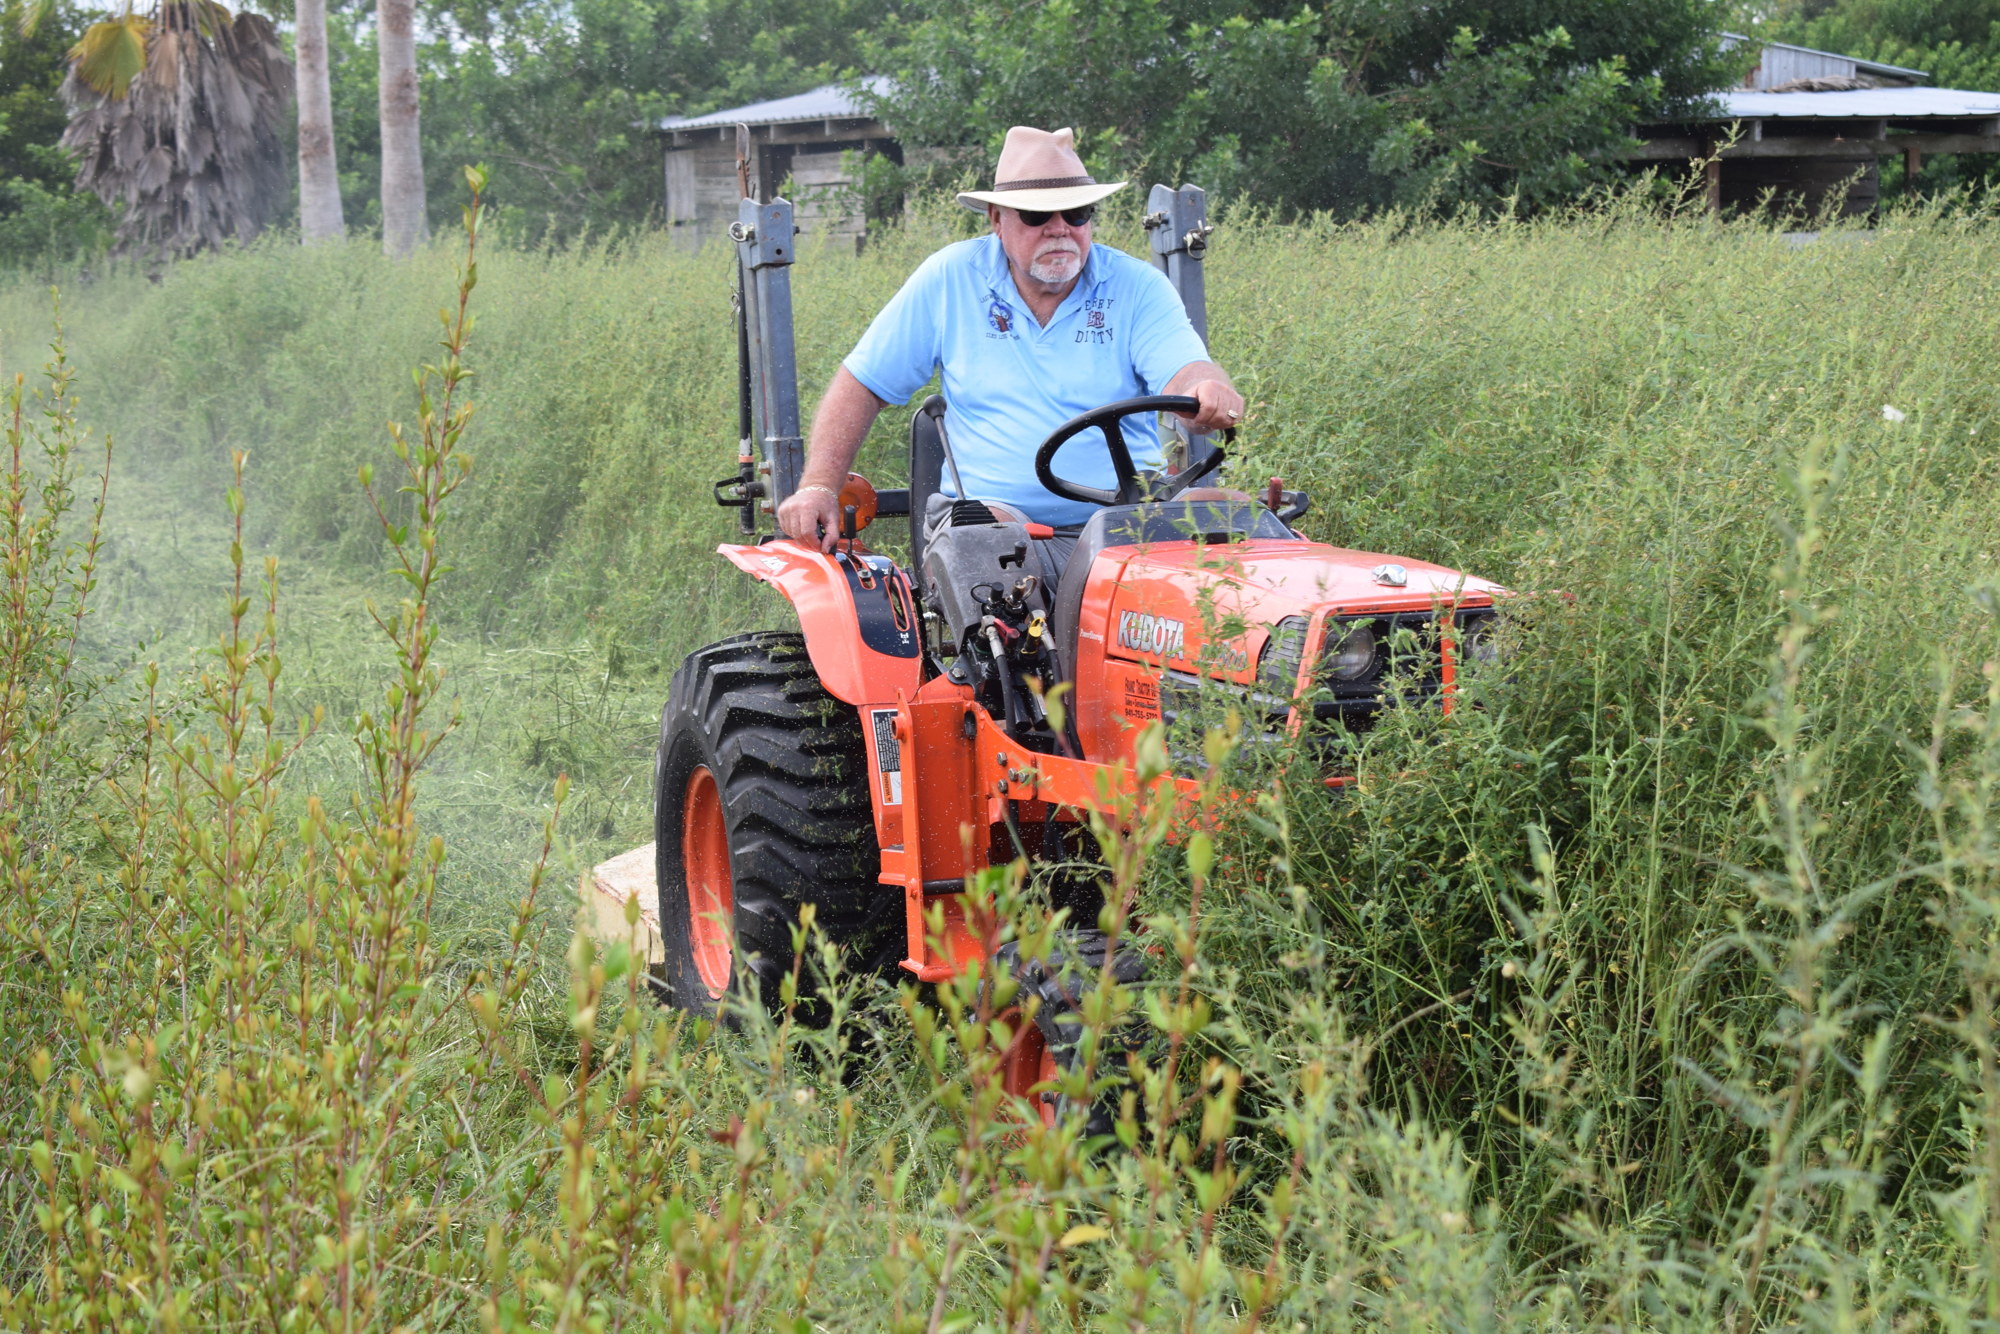 Elks Exalted Ruler Jerry Ditty donates his time to mow the Humane Society at Lakewood Ranch property.